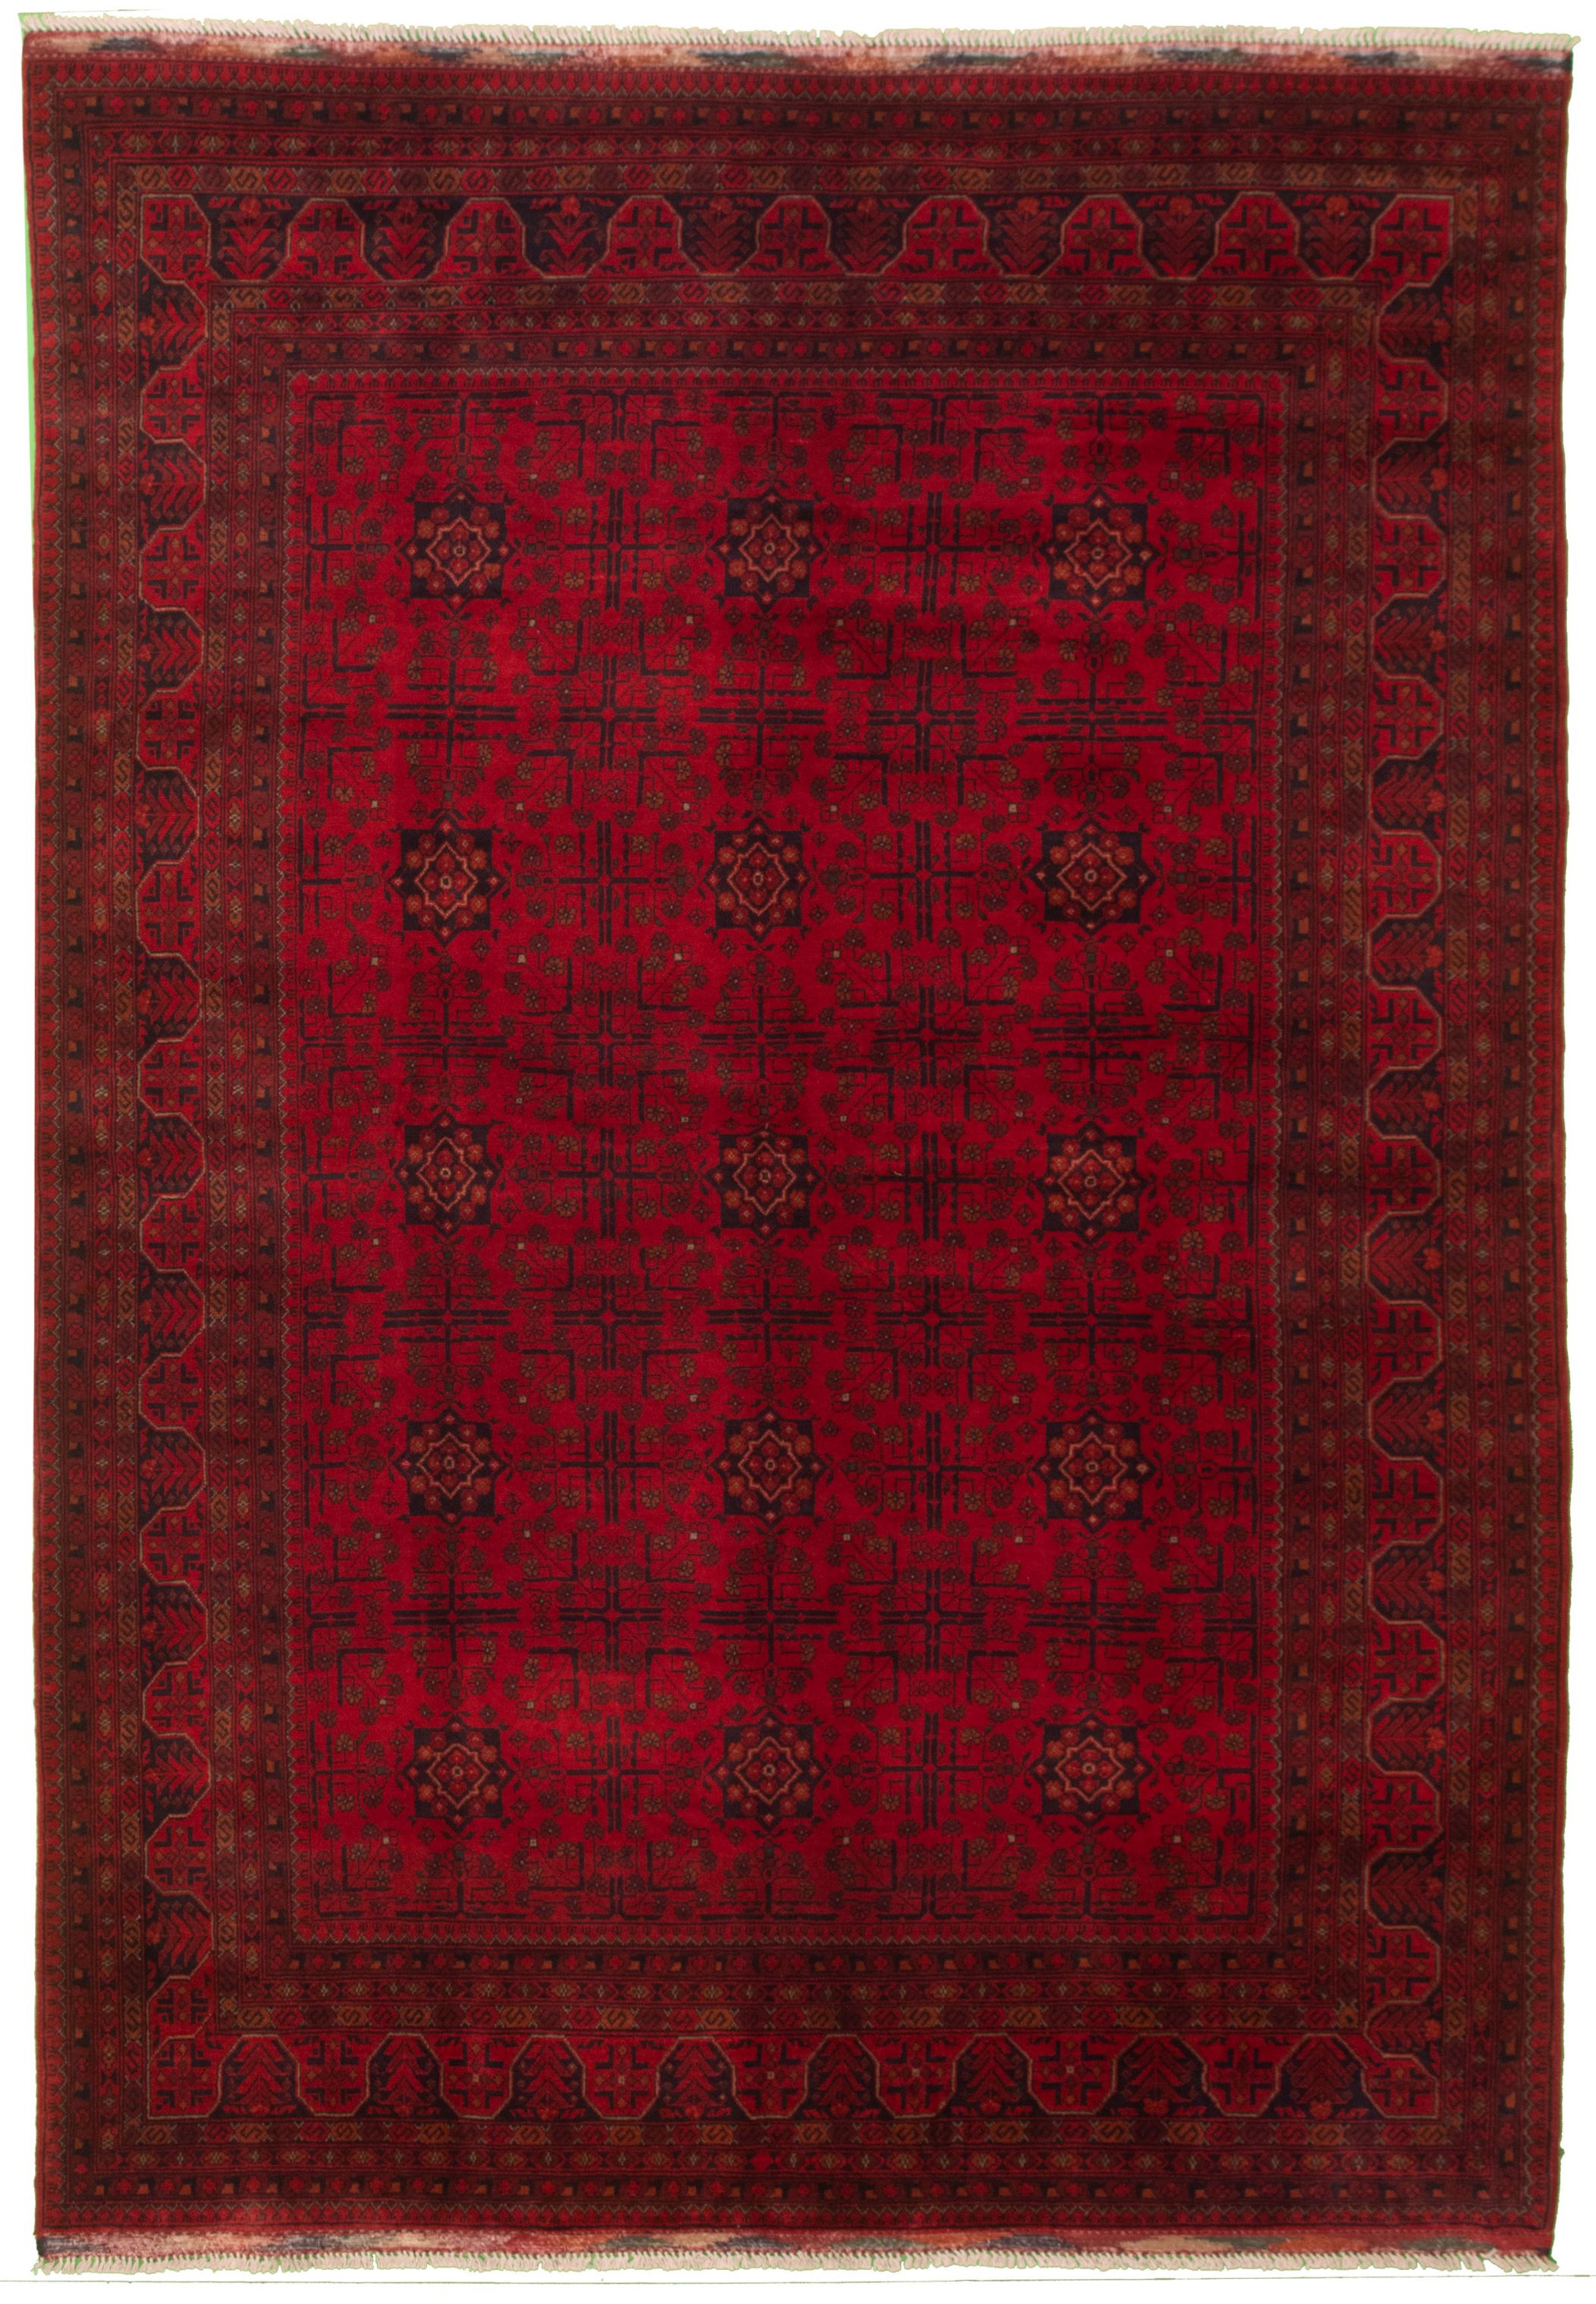 Hand-knotted Finest Khal Mohammadi Red Wool Rug 6'9" x 9'6"  Size: 6'9" x 9'6"  